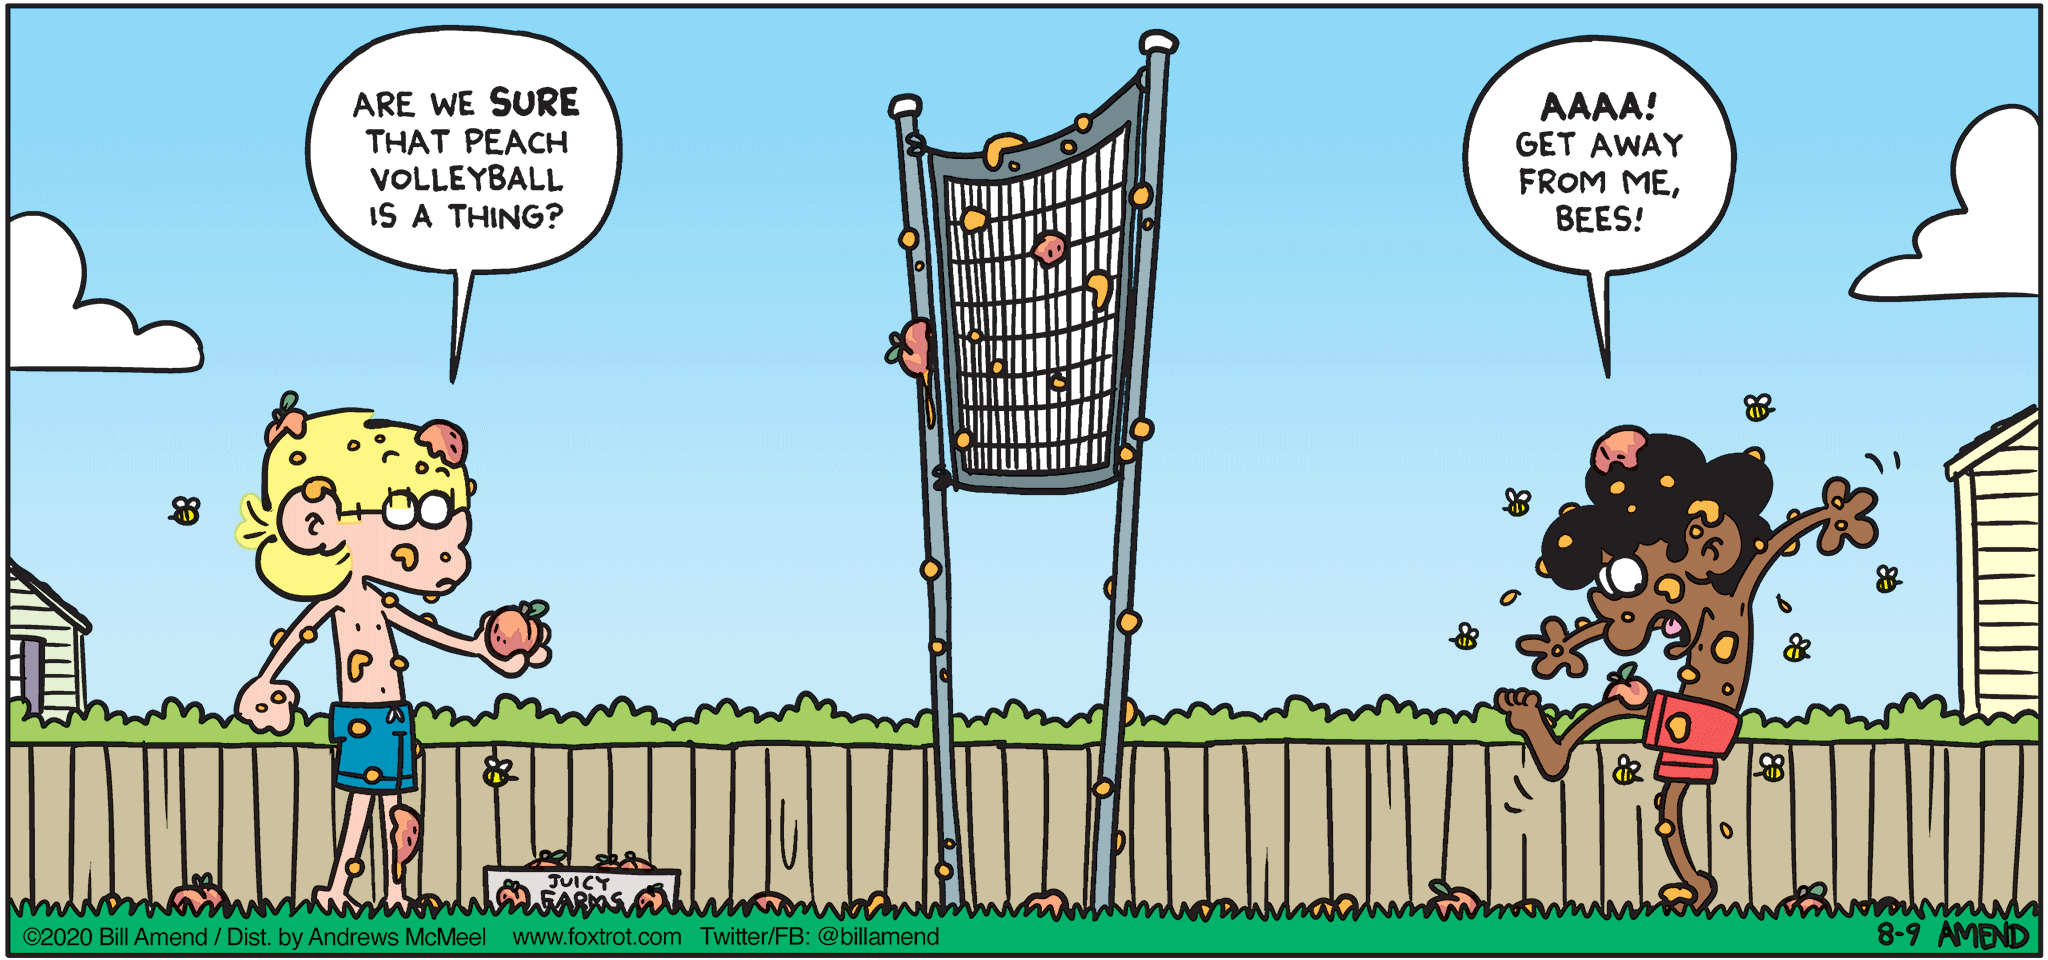 FoxTrot comic strip by Bill Amend - "Peachy" published August 9, 2020 - Jason Fox: Are we sure that peach volleyball is a thing? Marcus: AAAA! Get away from me, bees!